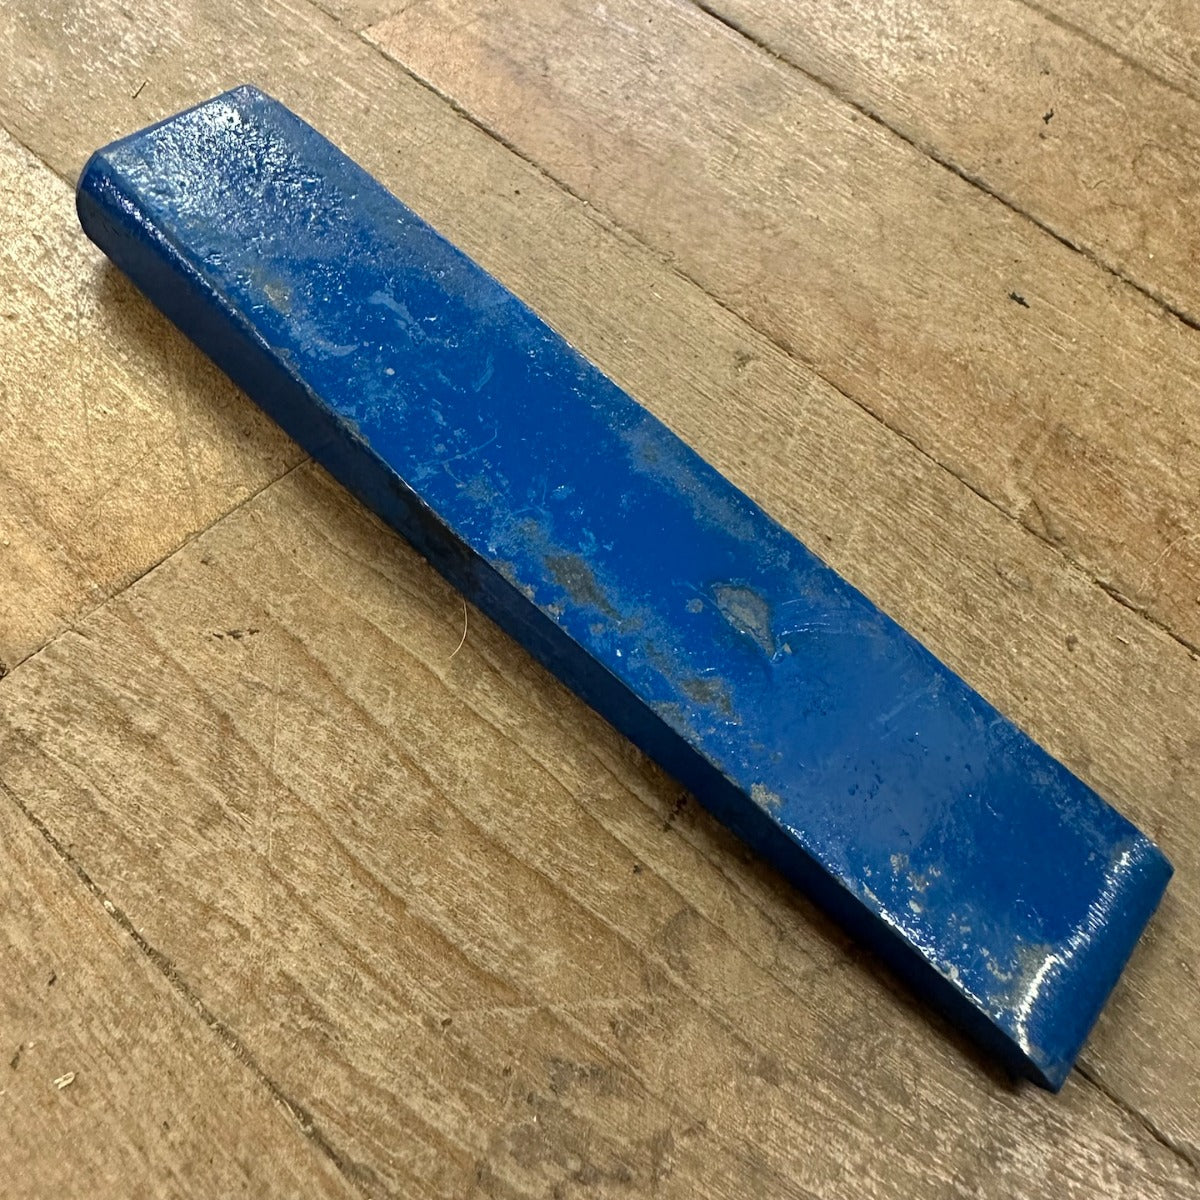 Lansing Forge 1/2" x 1 1/4" x6" Joint Breaking "Fox" Wedge (359-06)